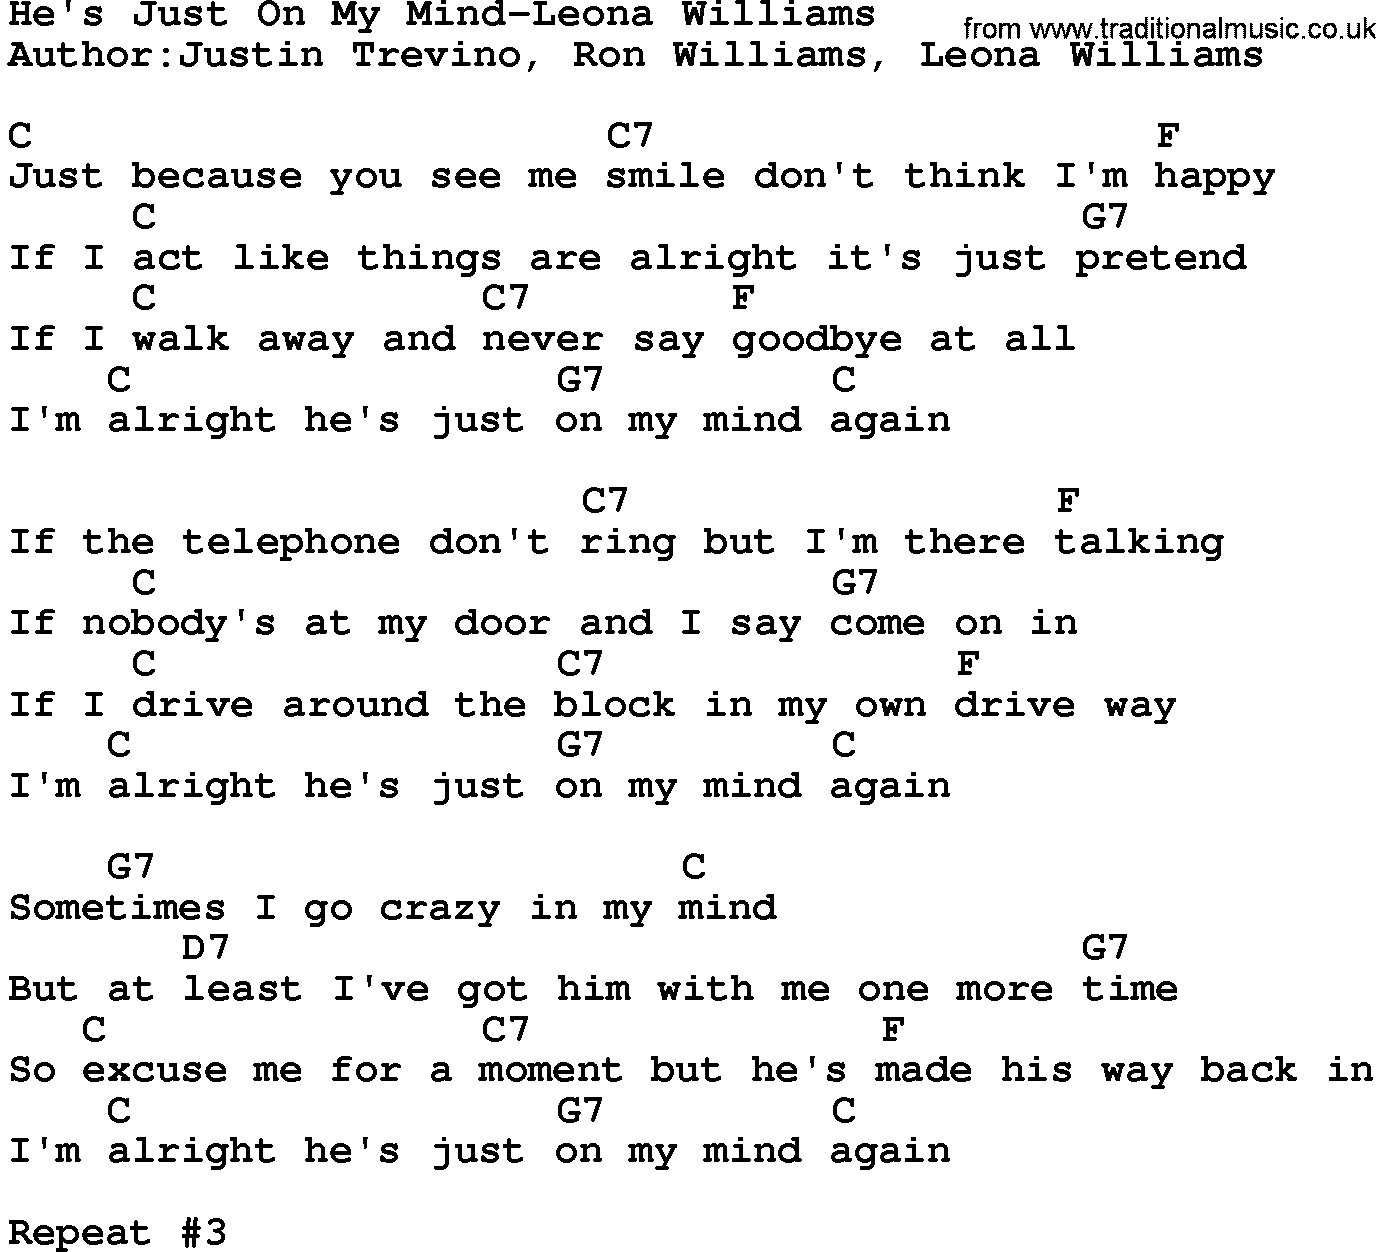 Country music song: He's Just On My Mind-Leona Williams lyrics and chords